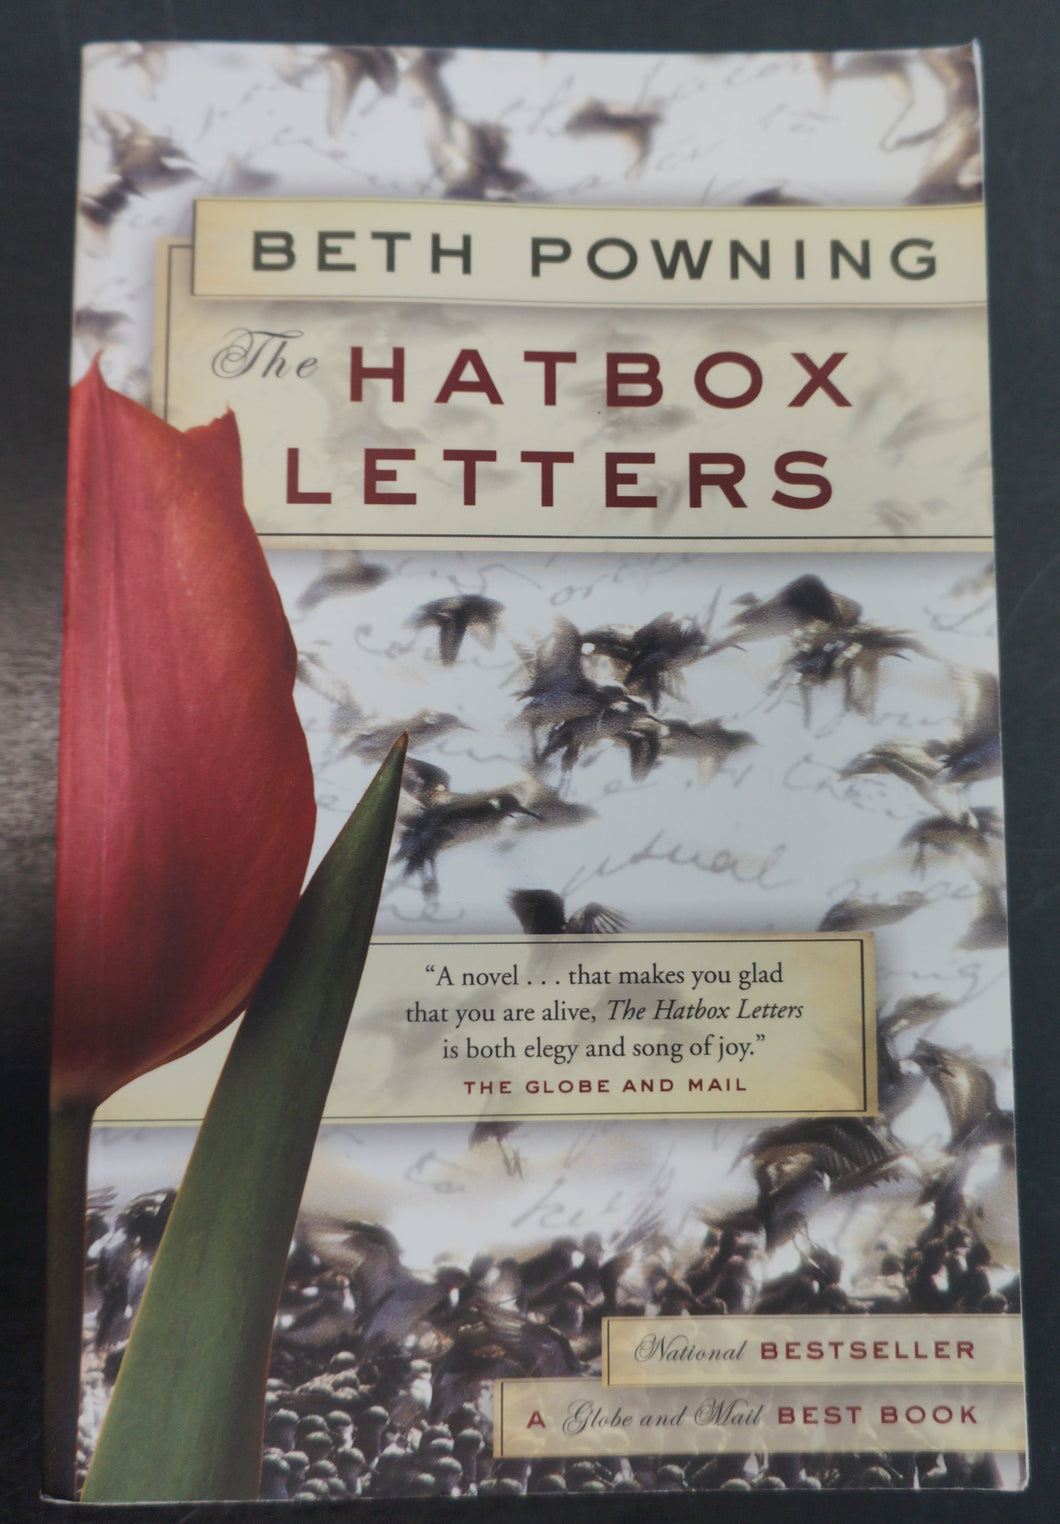 The Hatbox Letters by Beth Powning